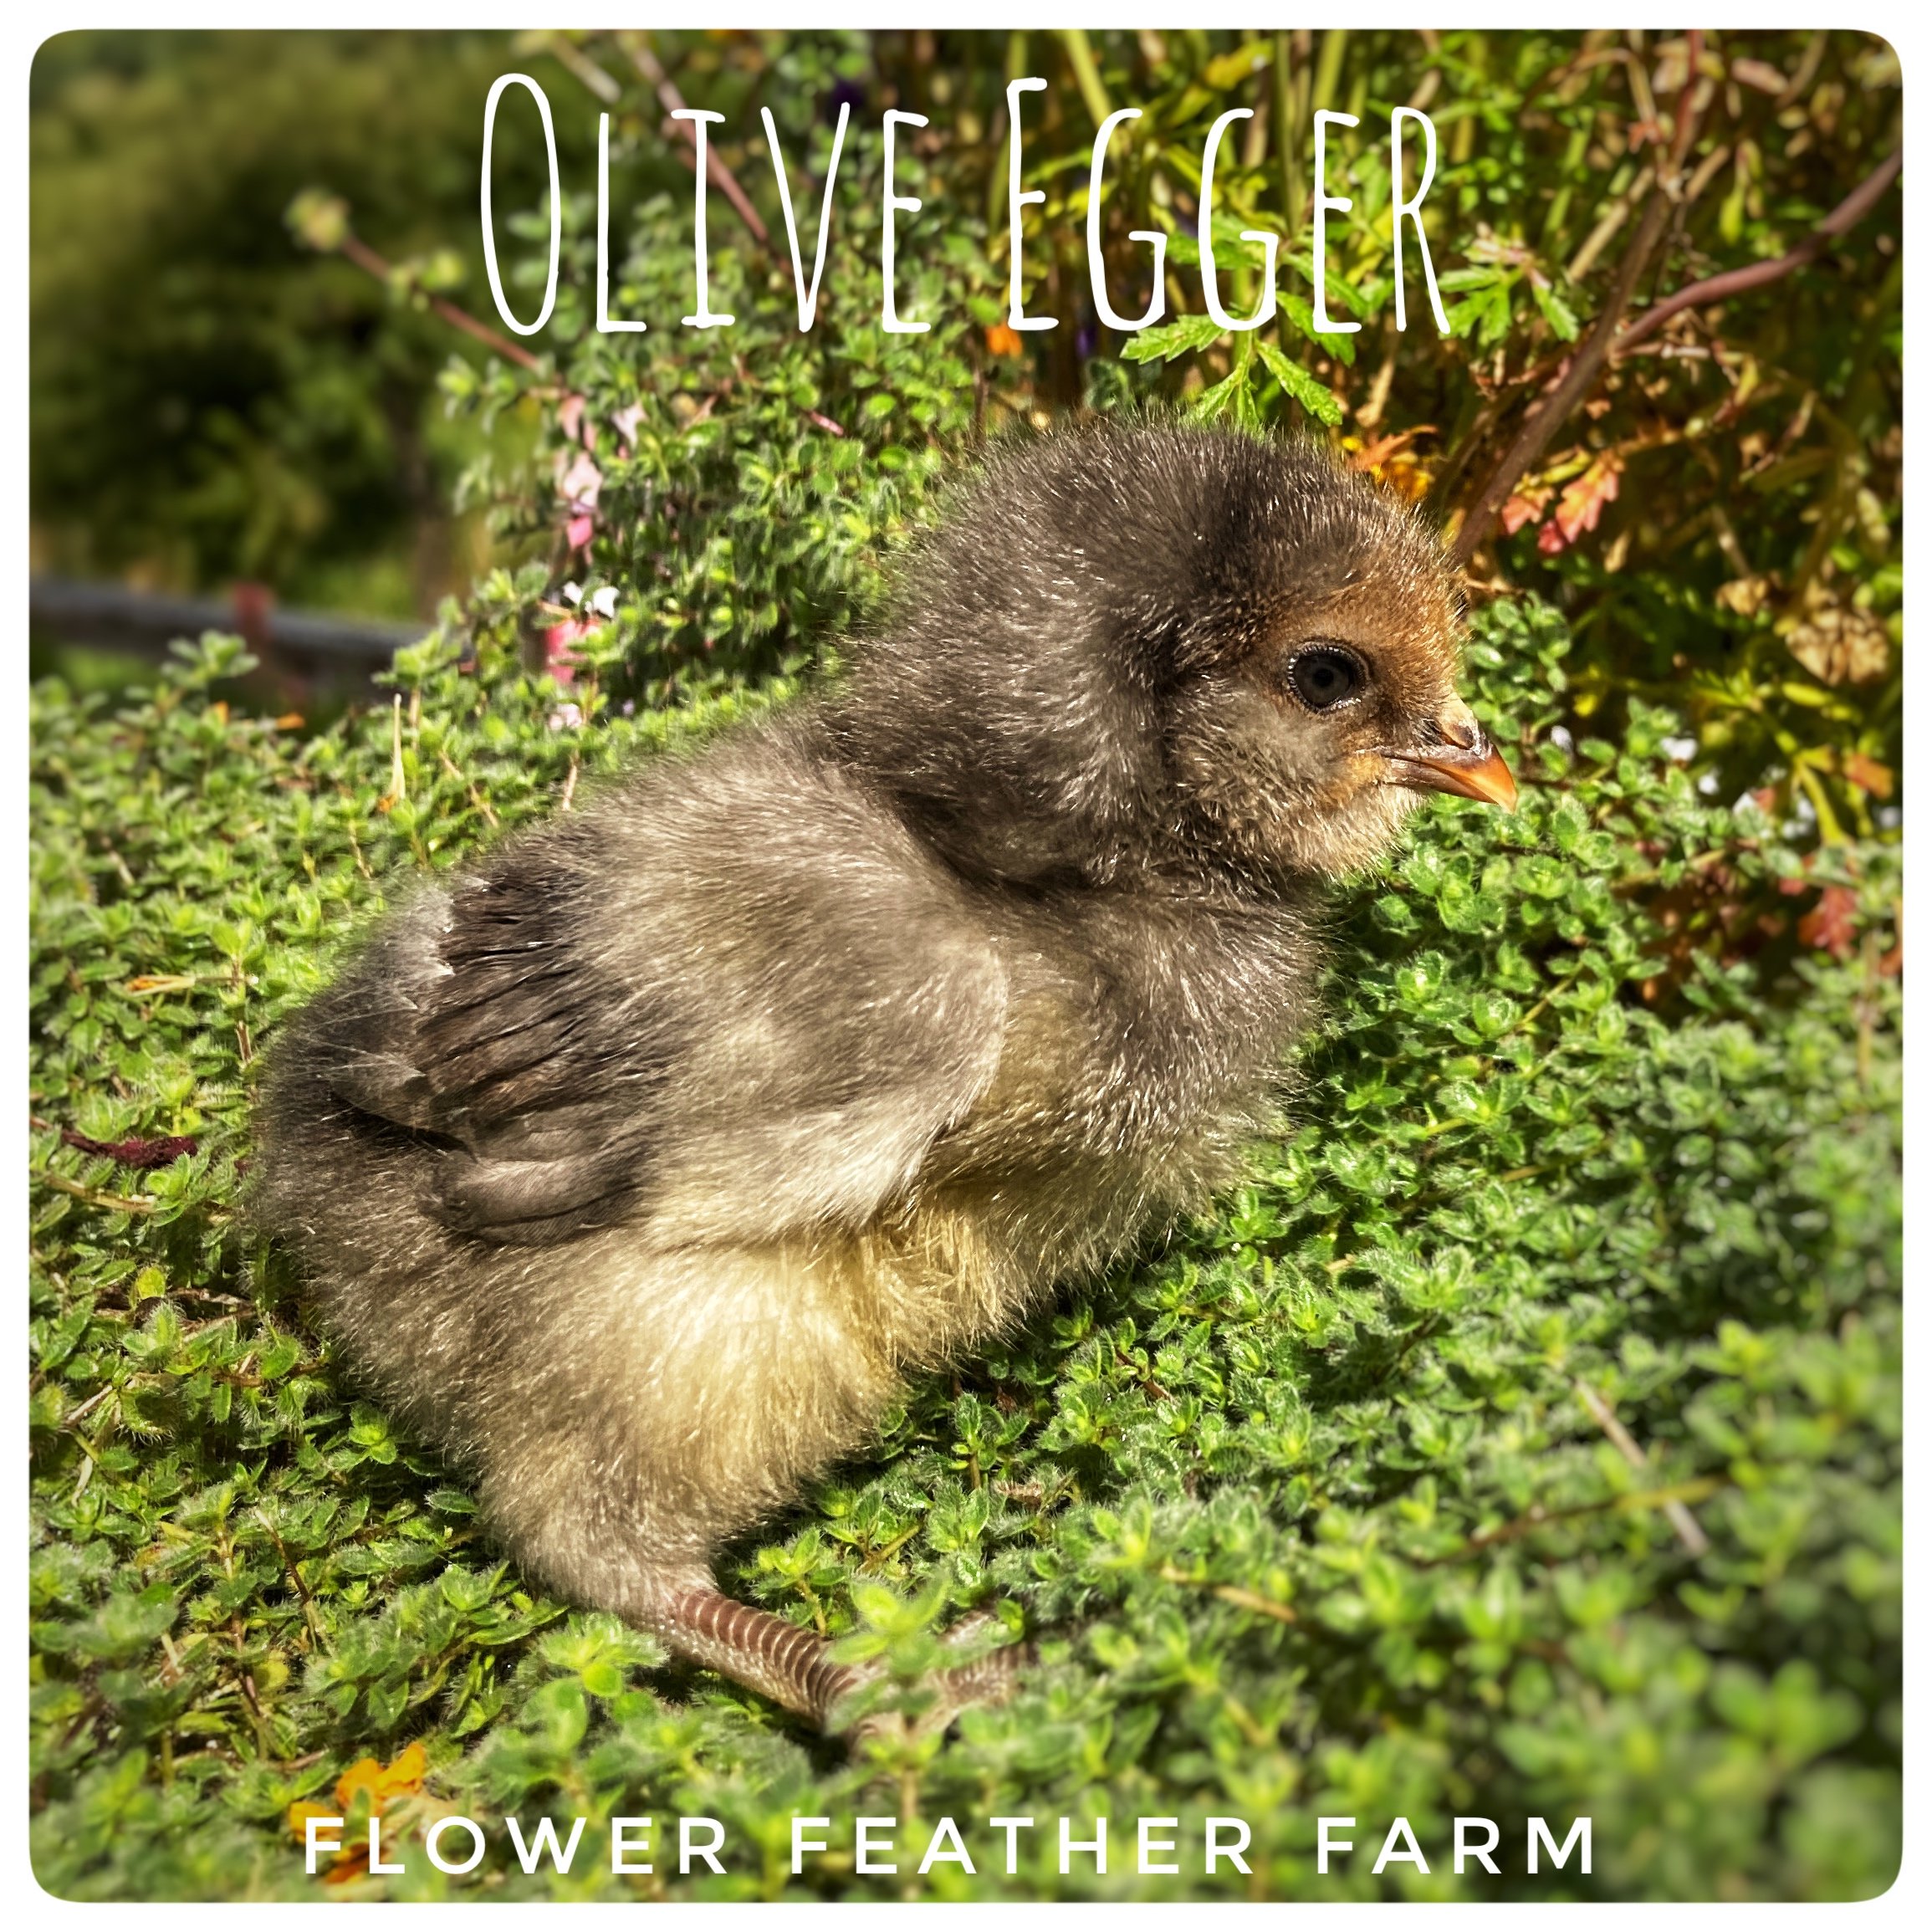 Olive Egger Chick at Flower Feather Farm, Specialty Chicks and Dahlia Tubers 